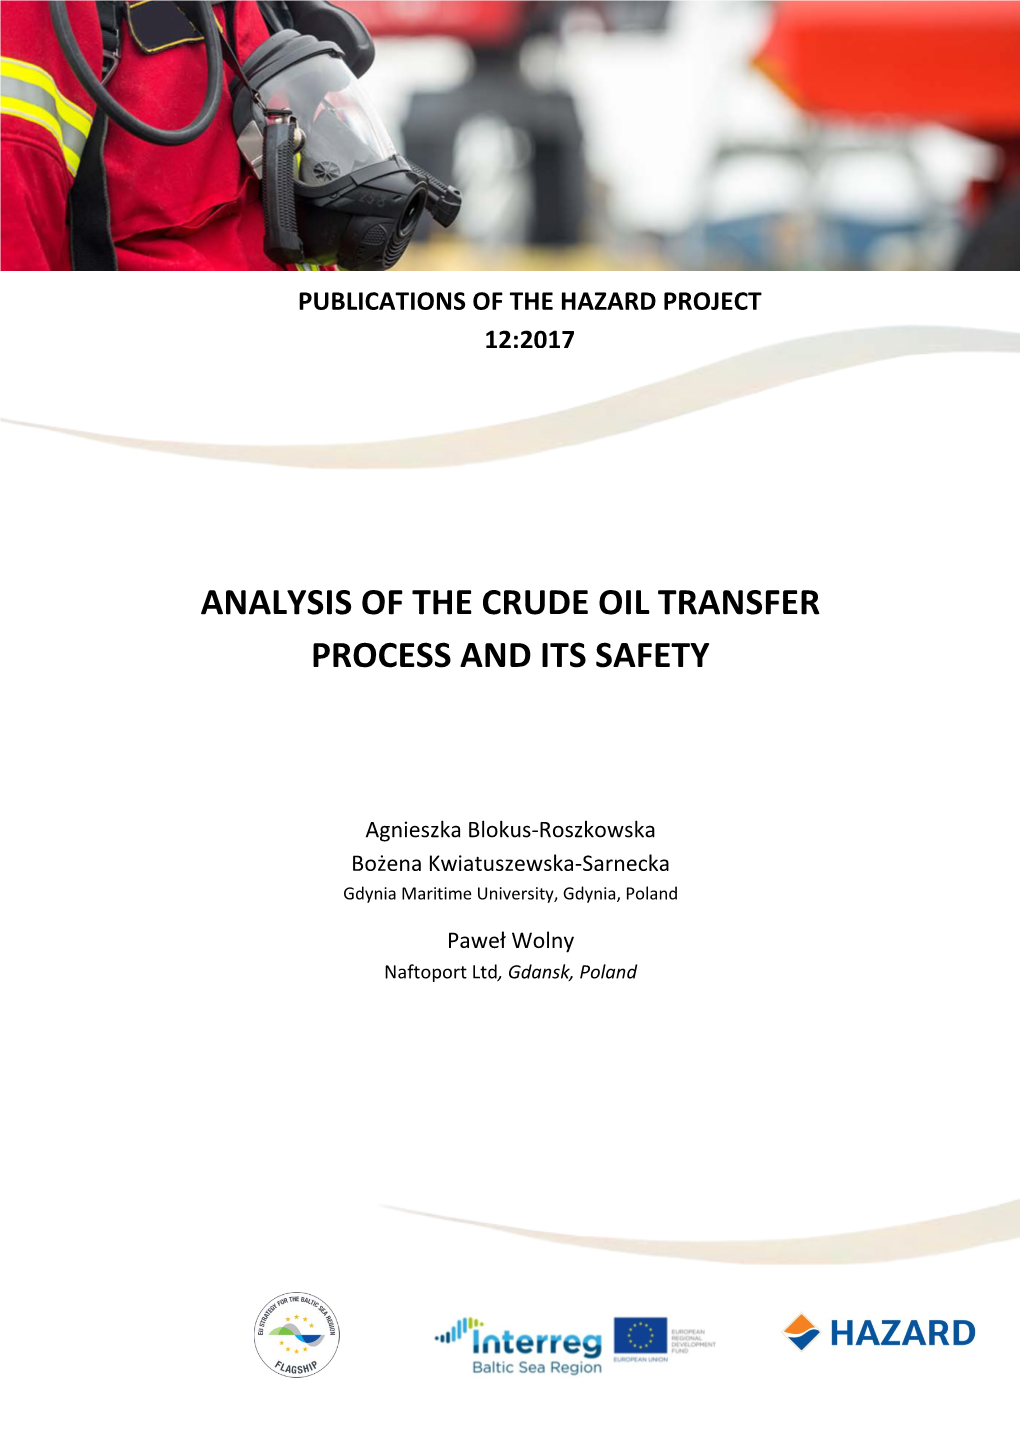 Analysis of the Crude Oil Transfer Process and Its Safety